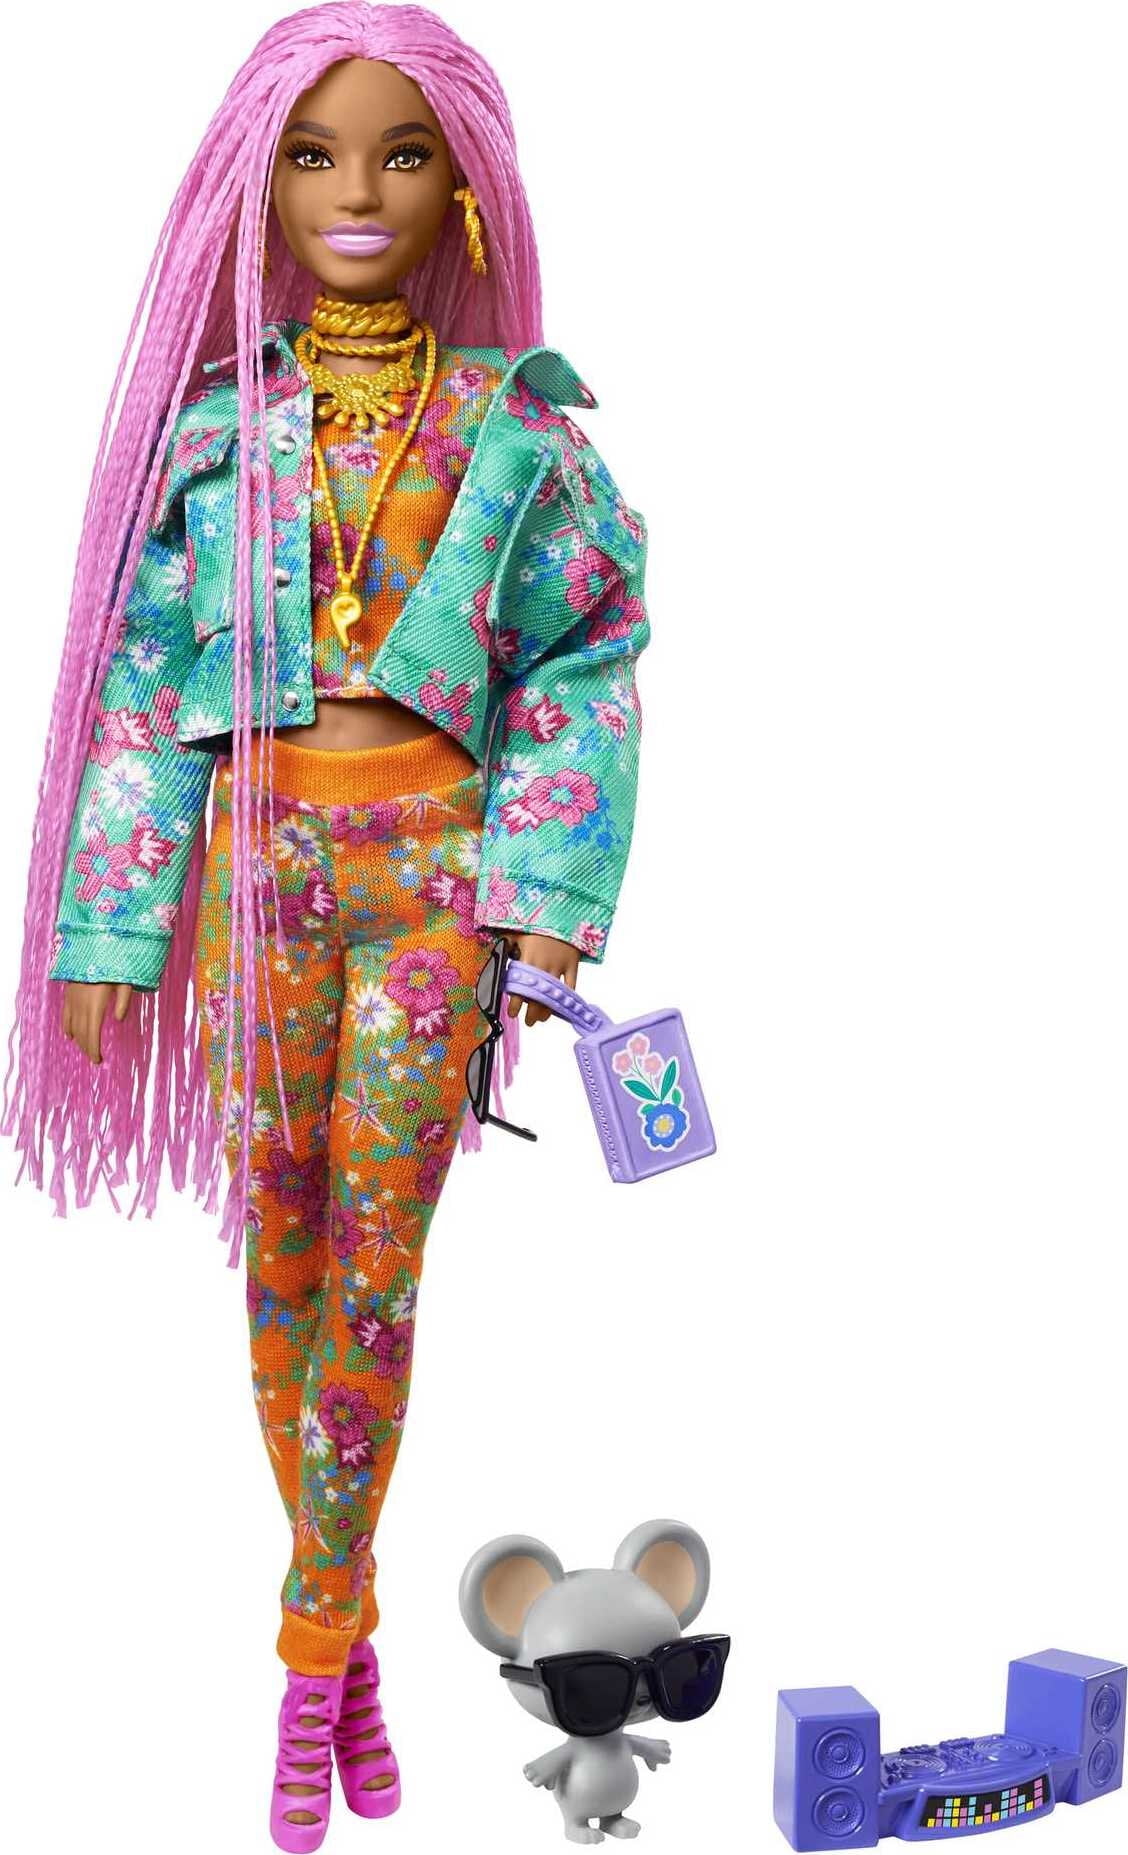 Barbie Extra Fashion Doll with Long Pink Braids in Teal Floral Jacket with  Accessories & Pet